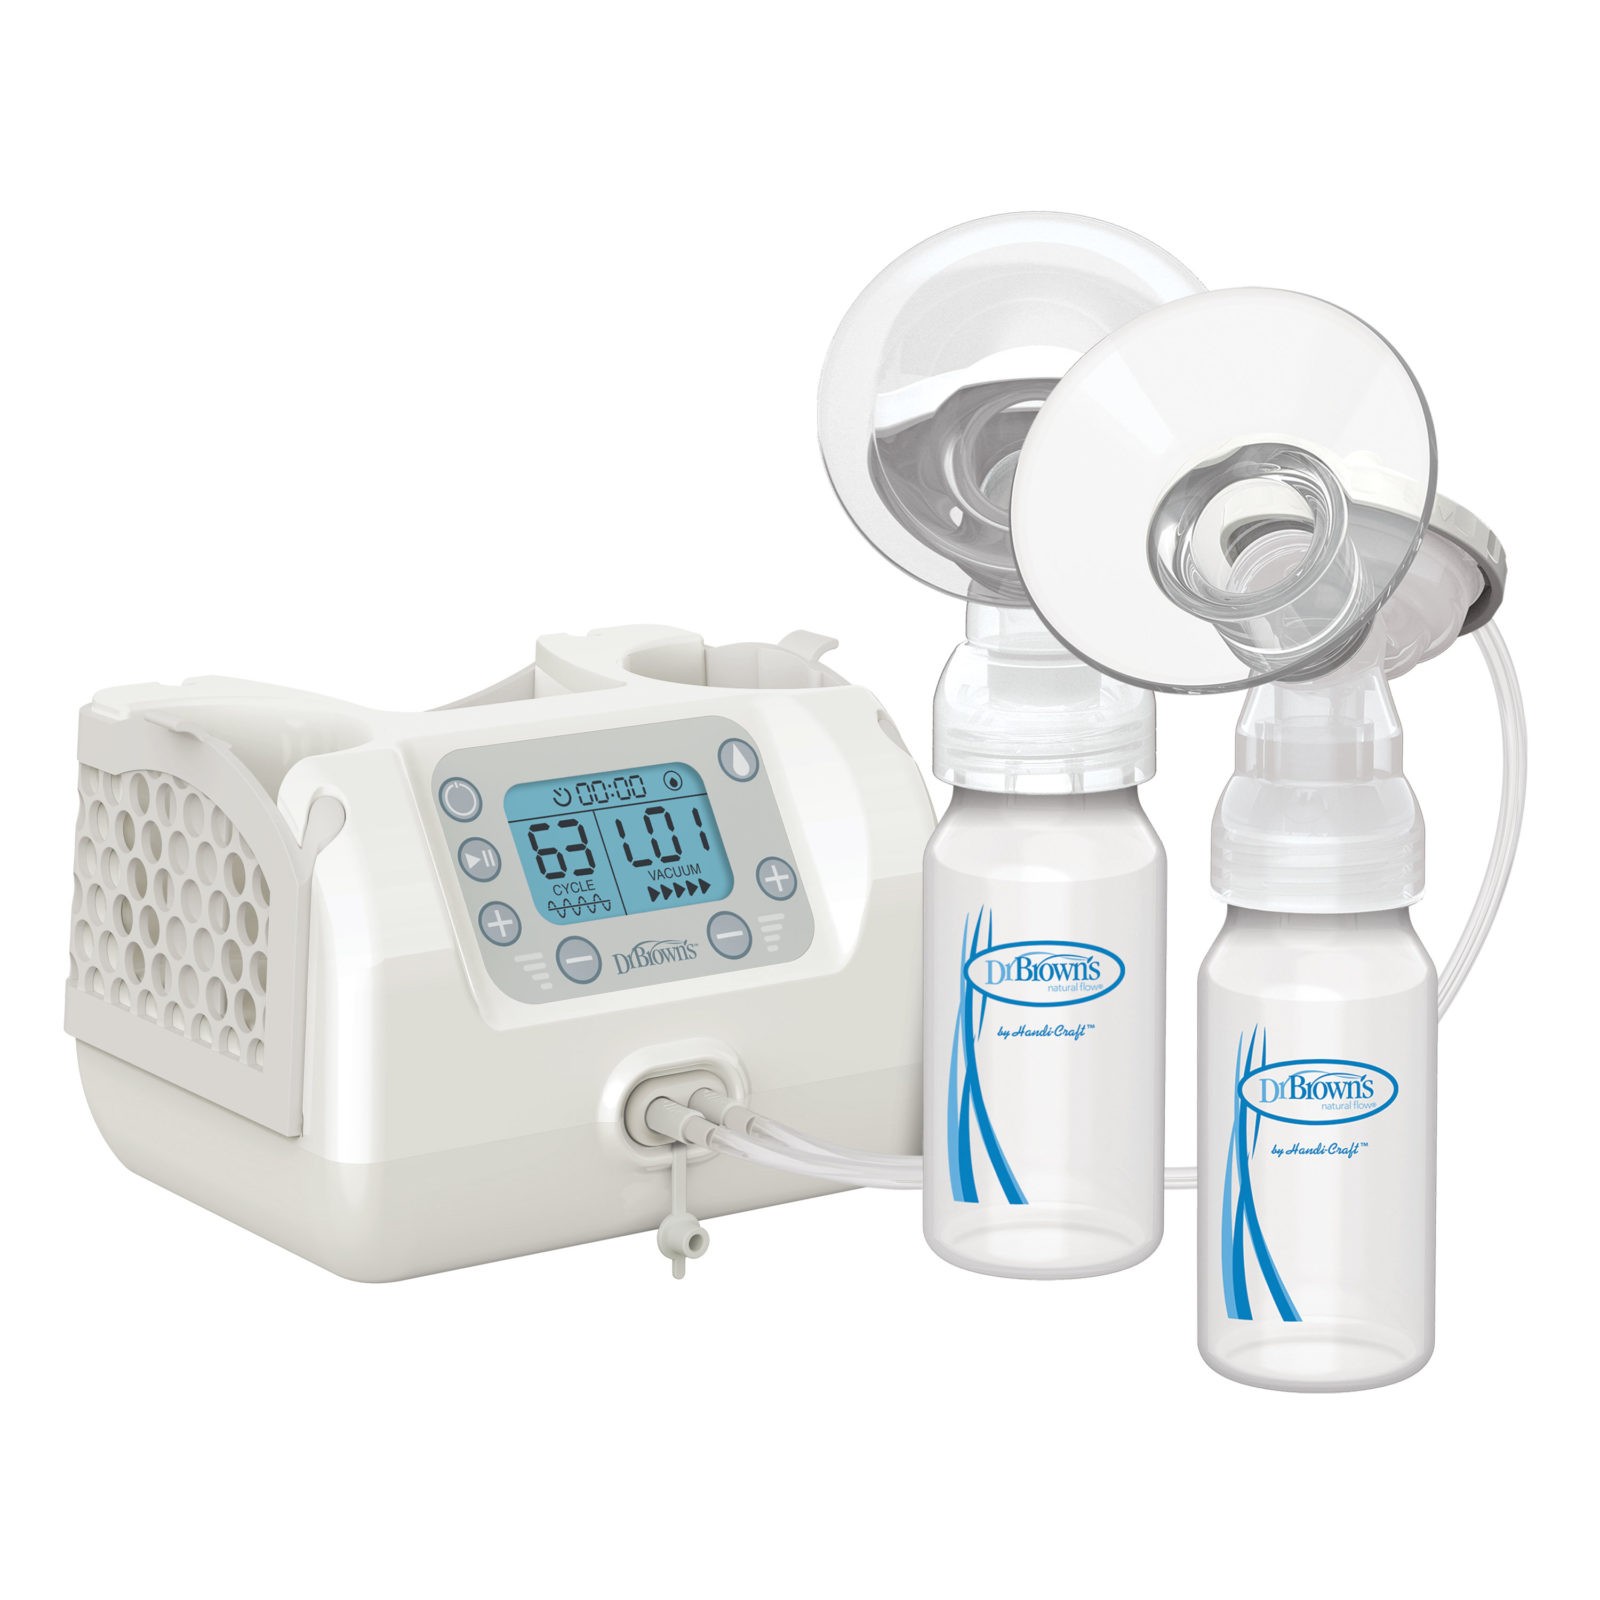 https://www.drbrownsbaby.com/wp-content/uploads/2020/08/BF100_Product_3Q_Double_Electric_Breast_Pump.jpg